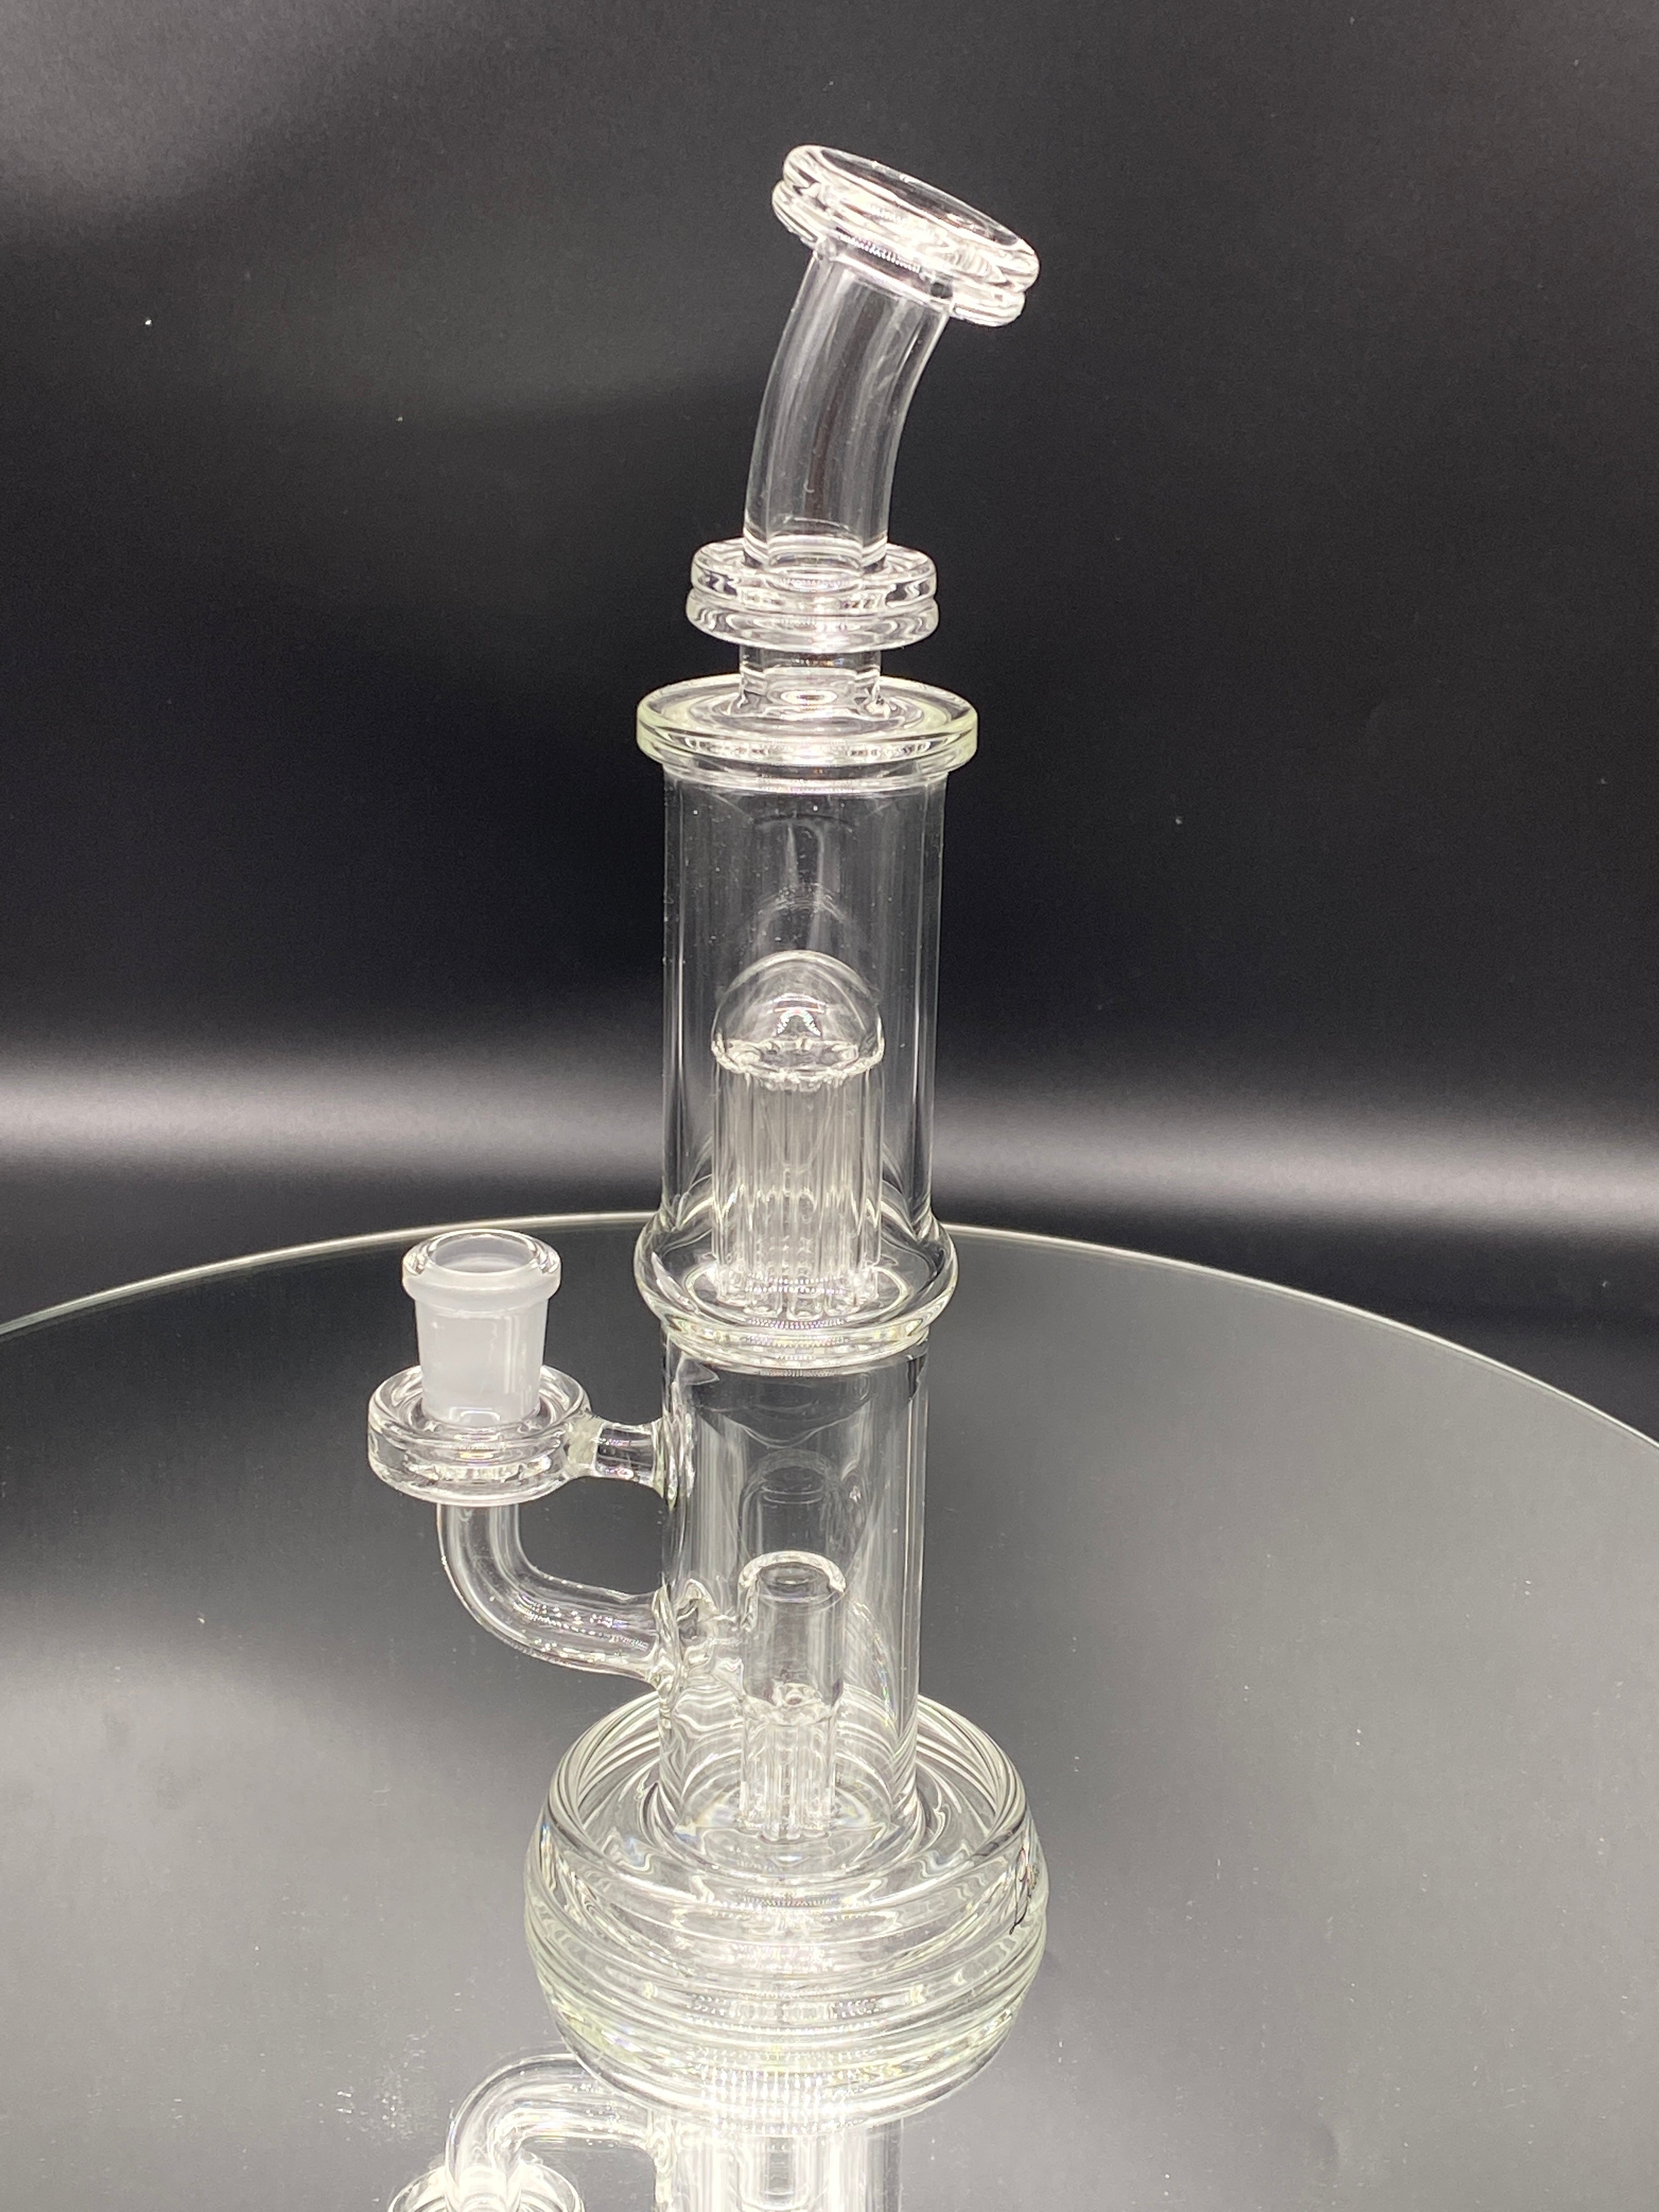 Leisure Glass Lil Dubs 14mm - TheSmokeyMcPotz Collection 